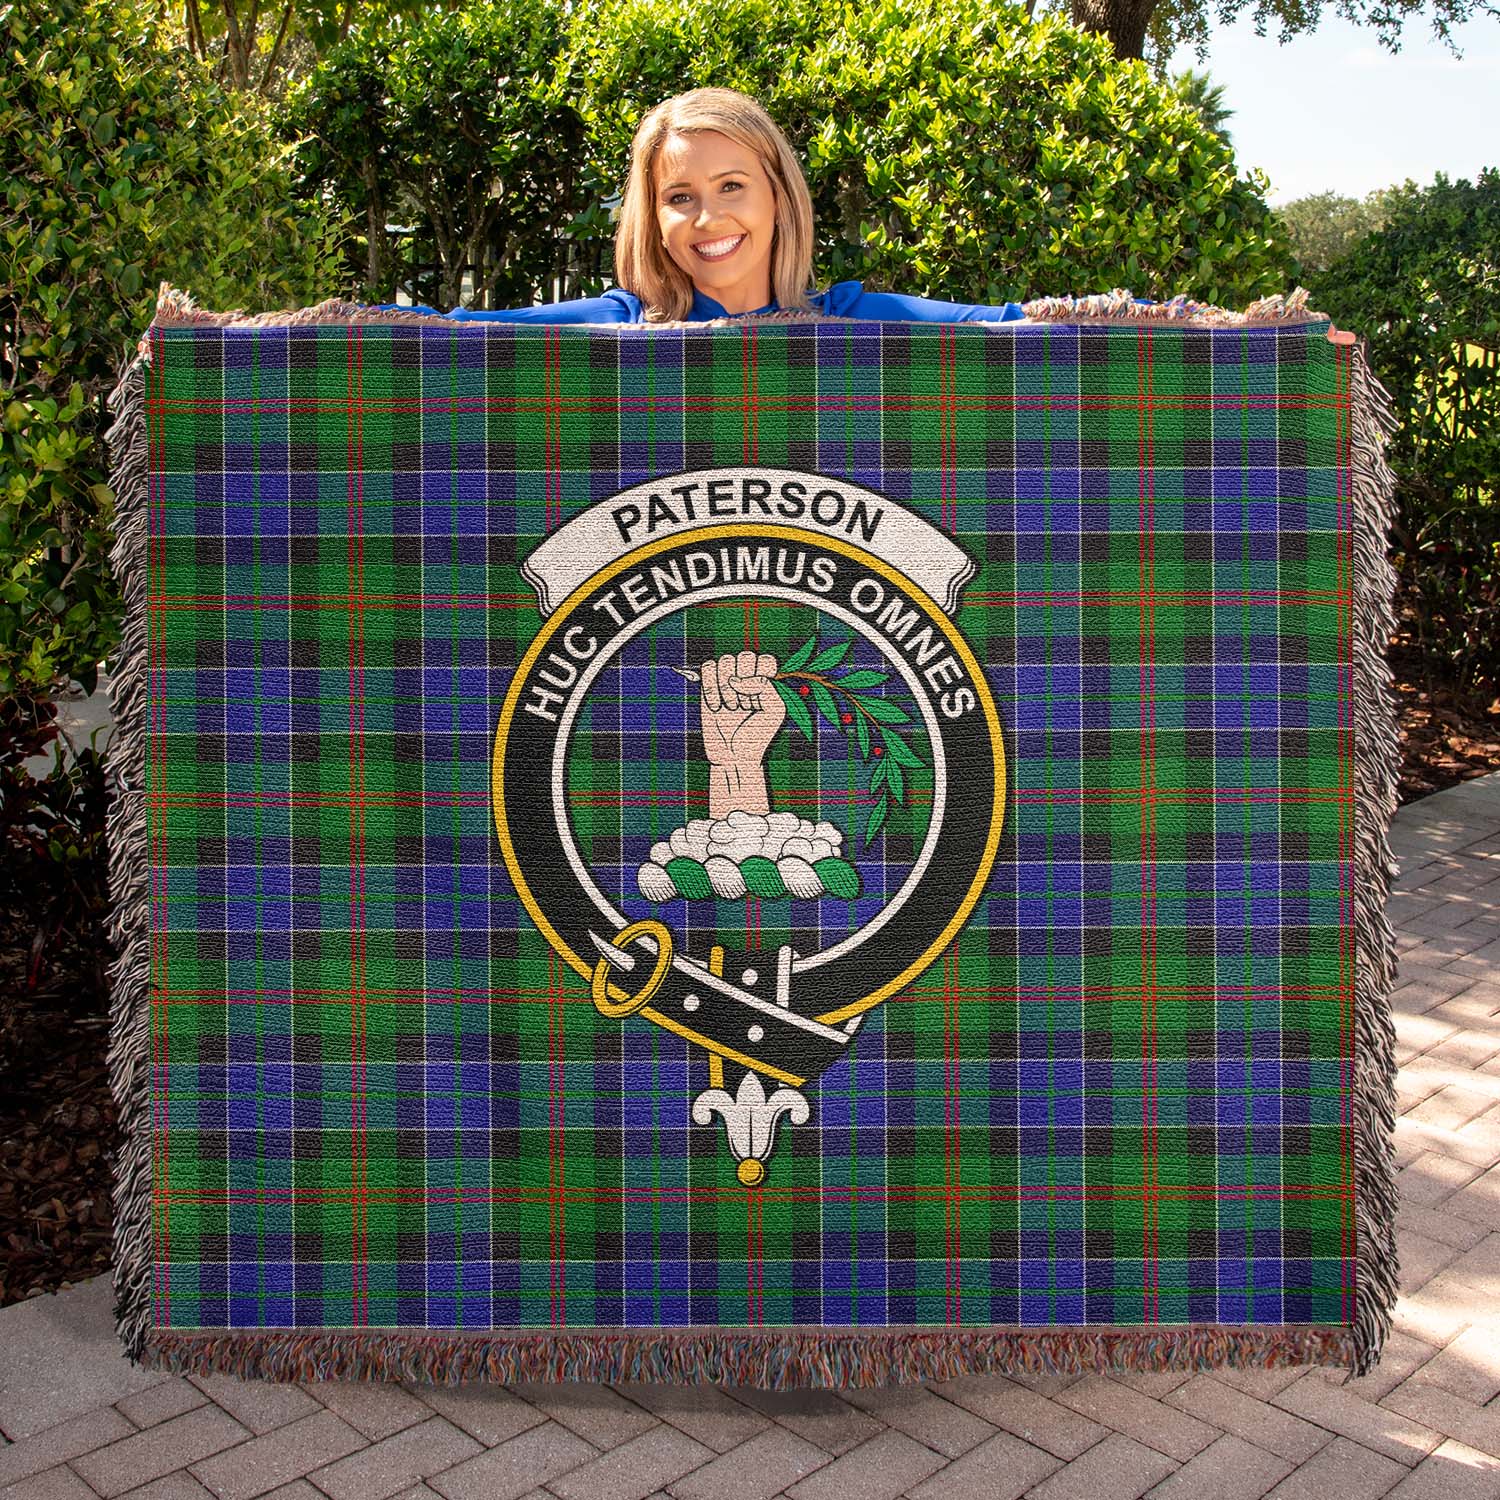 Tartan Vibes Clothing Paterson Tartan Woven Blanket with Family Crest